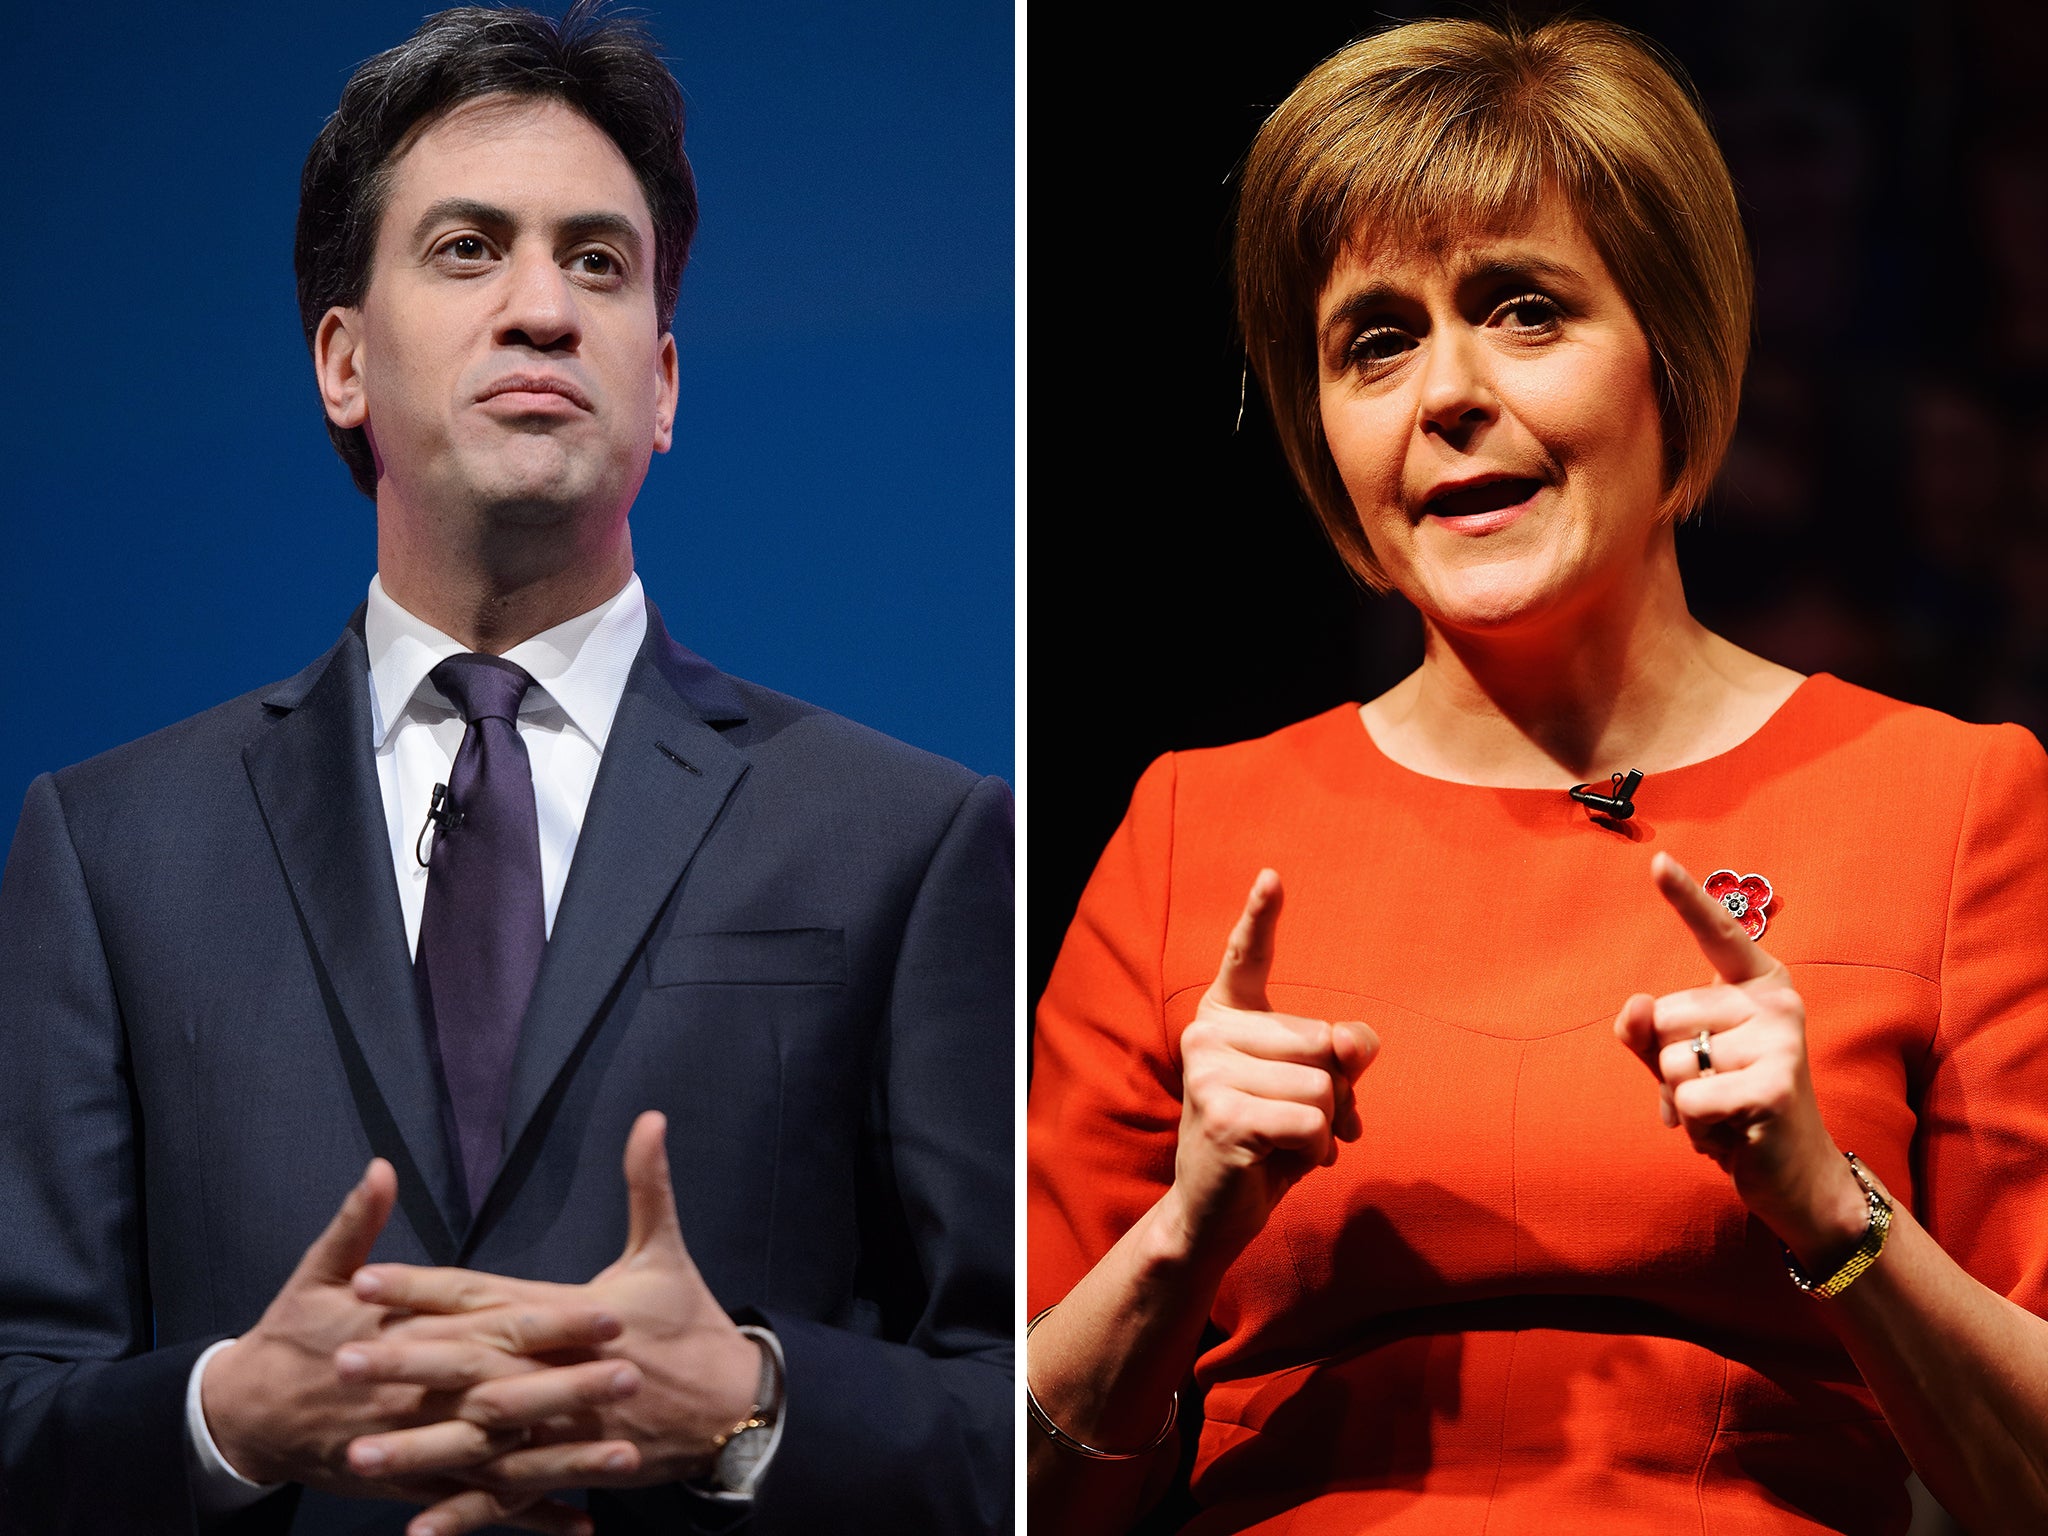 Labour and SNP could unite as a left-wing coalition after the election